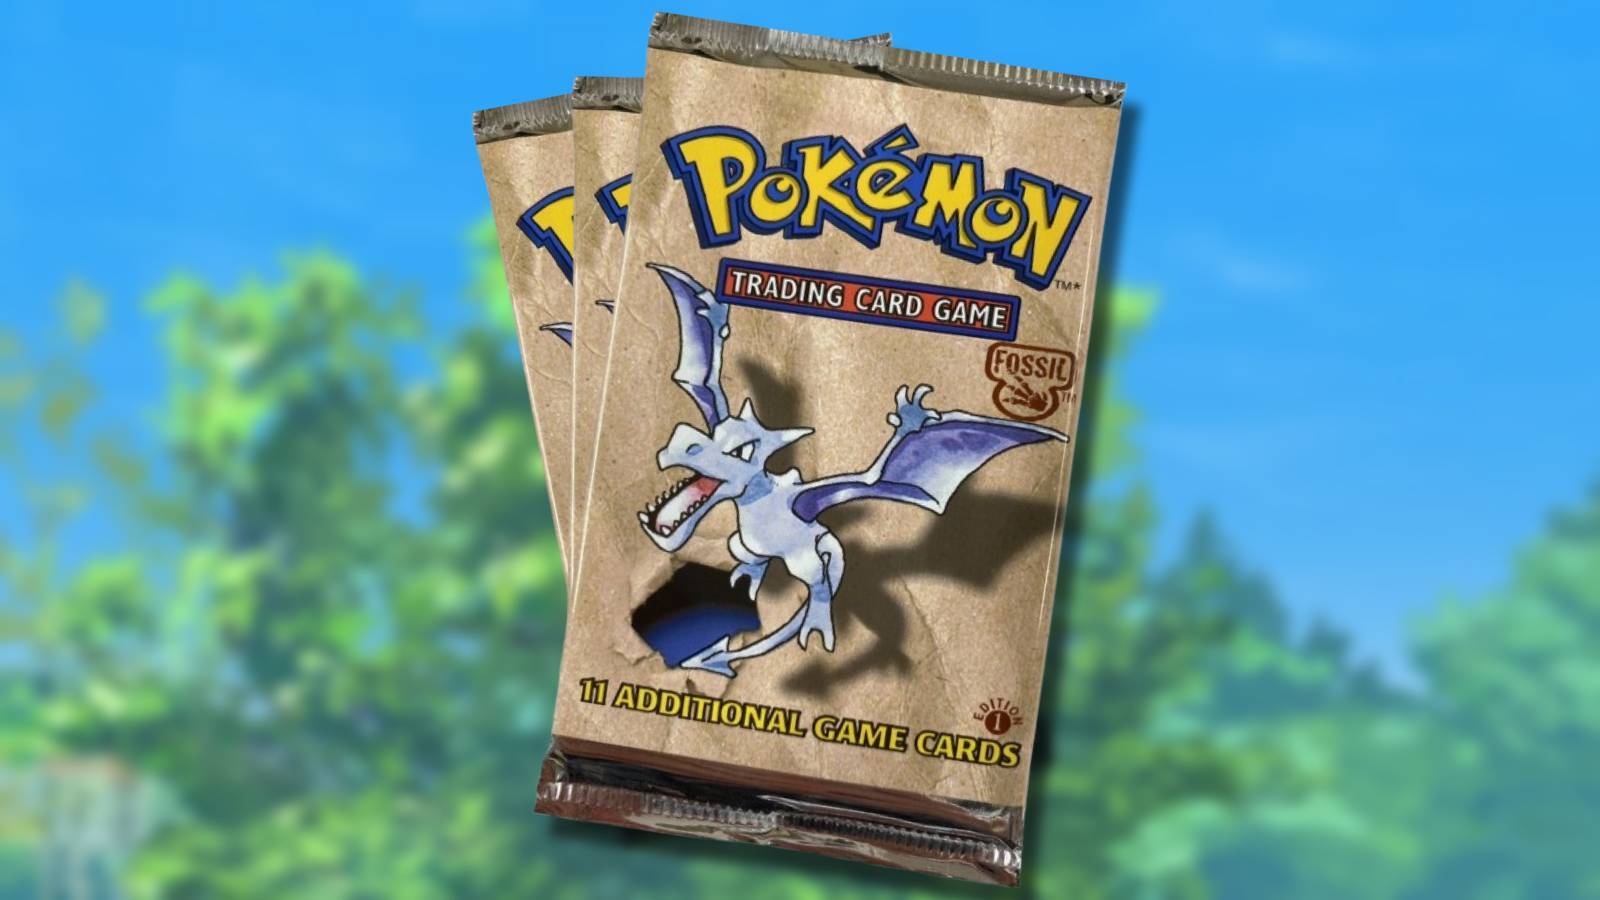 Vintage Jungle booster pack Pokemon cards with Pokemon GO background